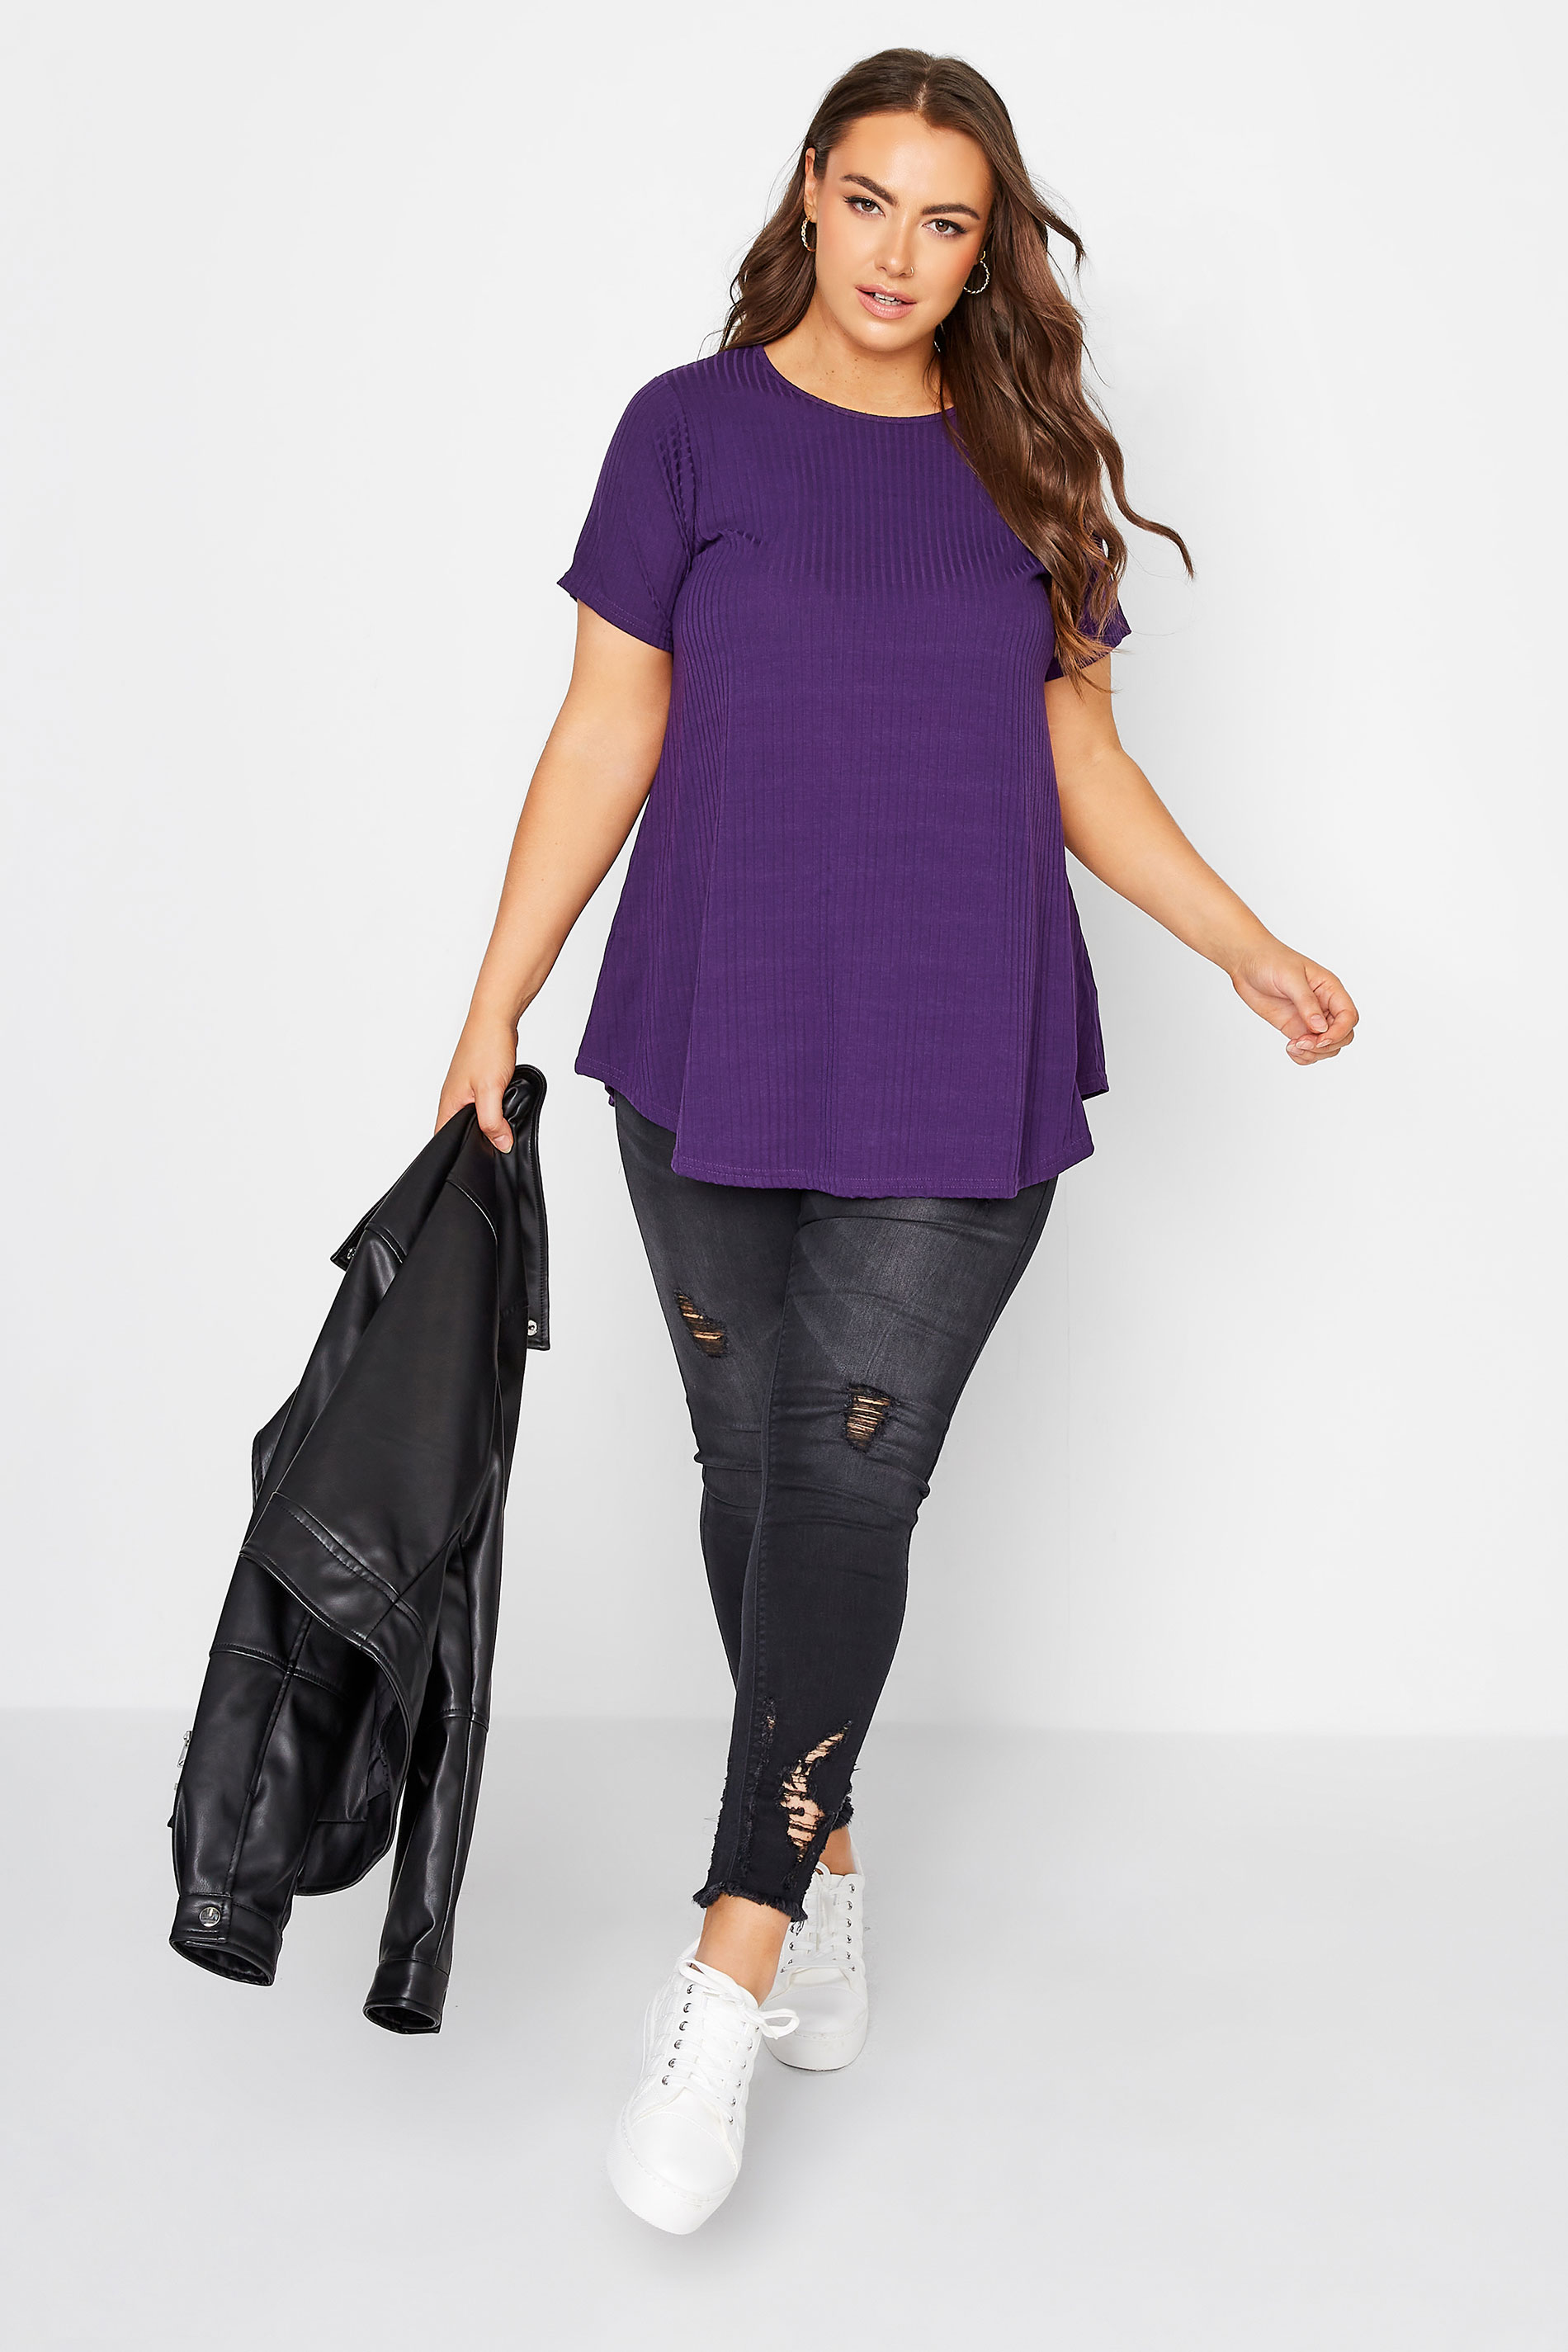 LIMITED COLLECTION Plus Size Purple Ribbed Swing Top | Yours Clothing 2